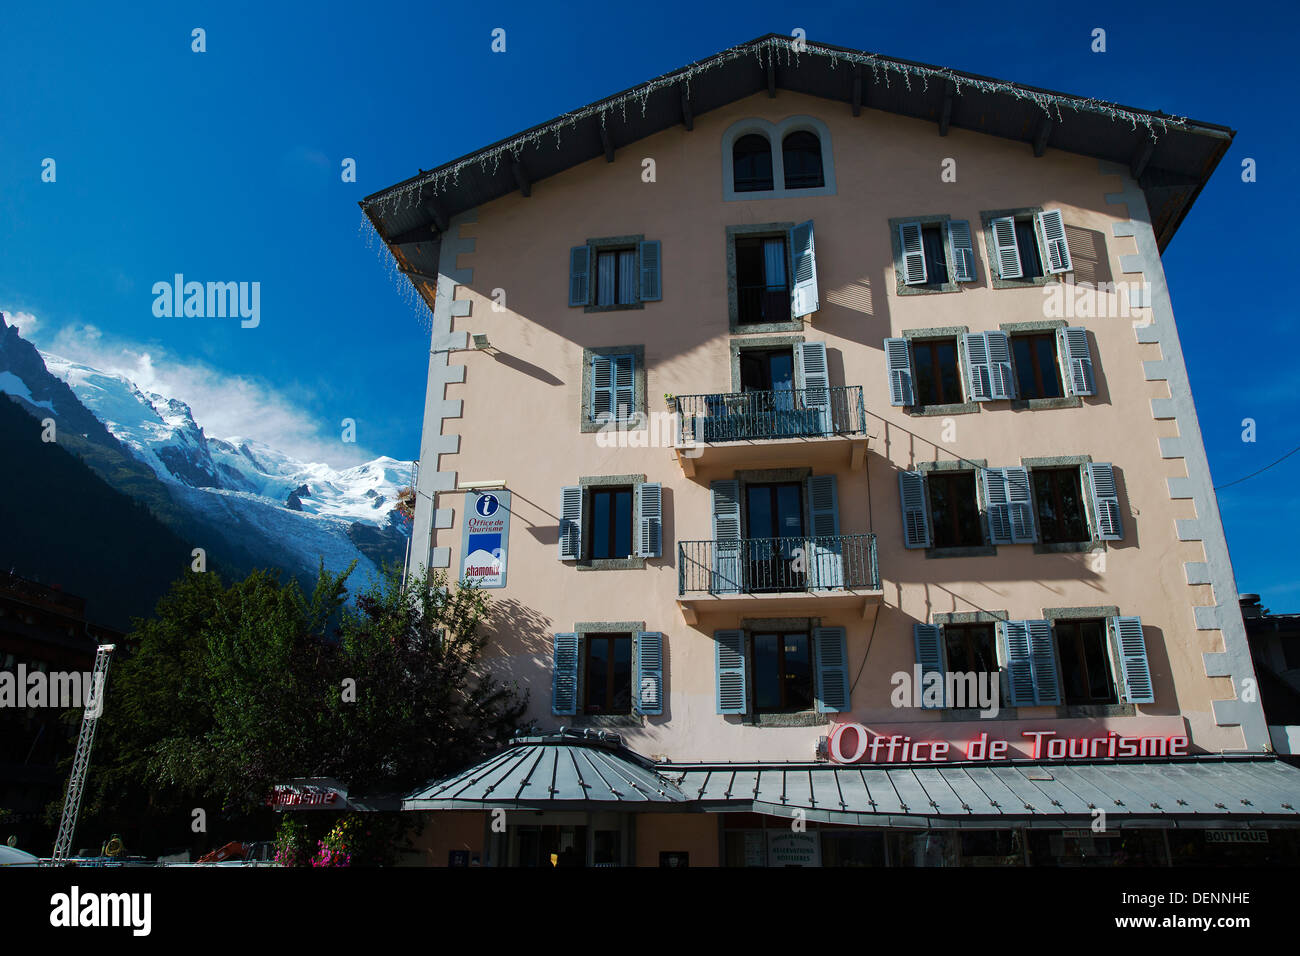 Tourist information centre (Office de Tourism) in Chamonix, with Mont Blanc Massif in the background, French Alps Stock Photo